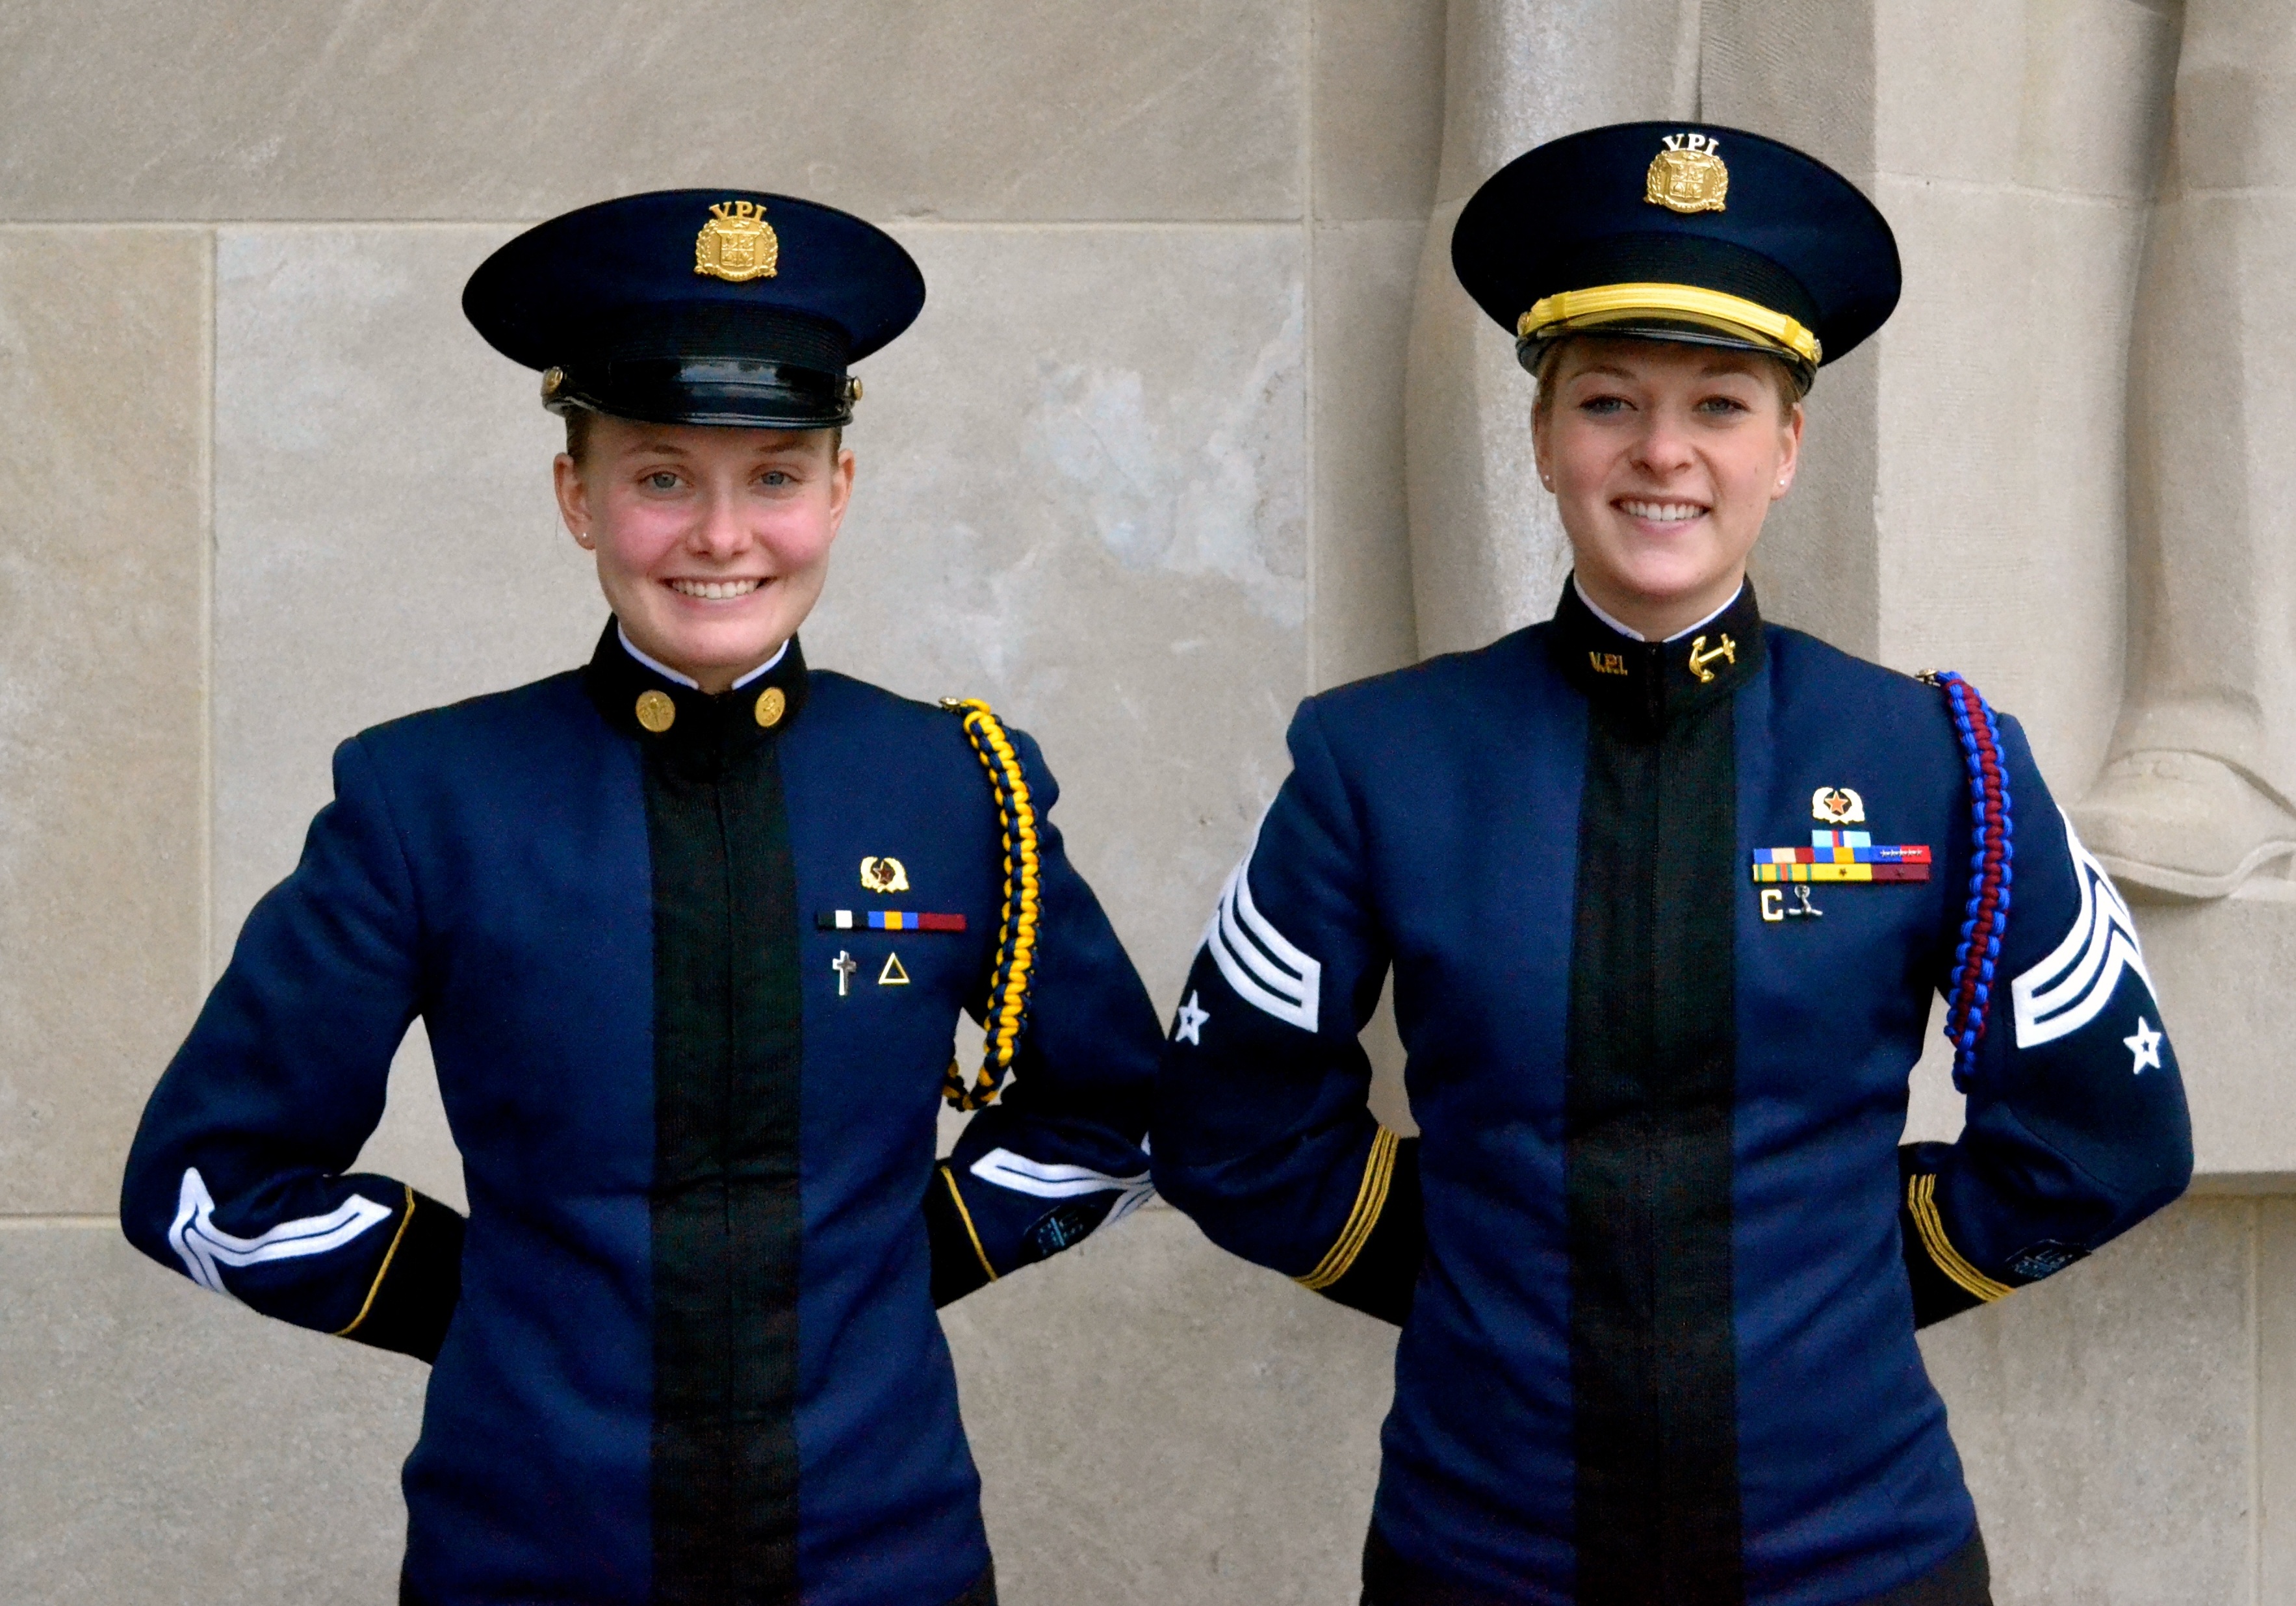 From left to right are Cadet Lindsey Bittinger and Cadet Wendy Zehner standing in front of the Pylons.